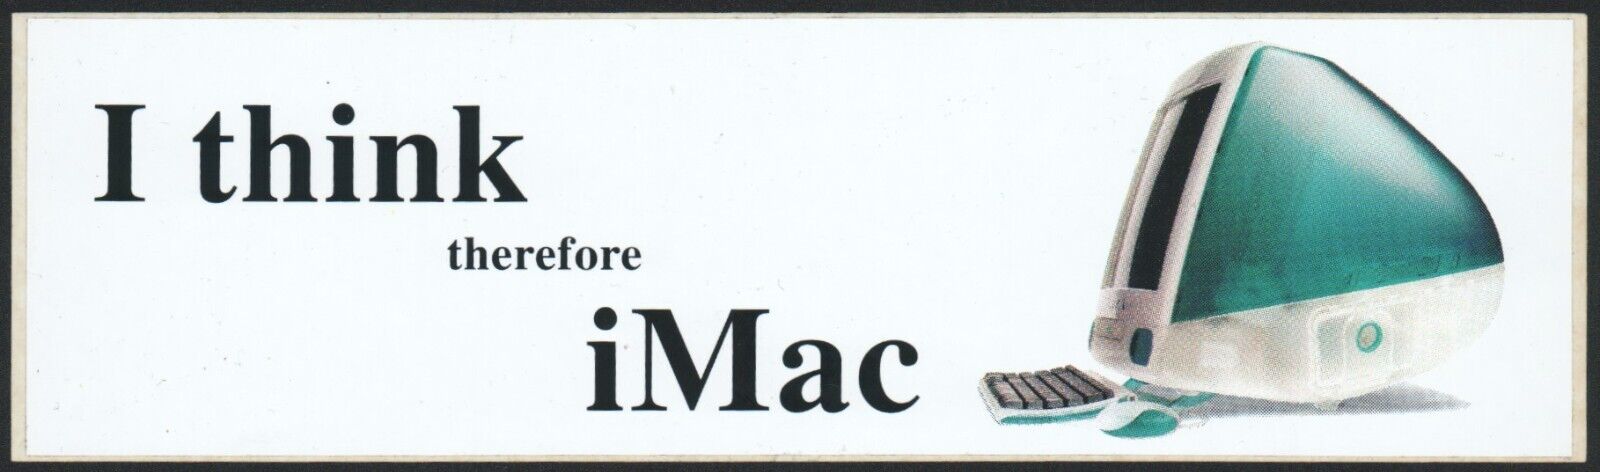 APPLE STICKER I think therefore iMac 1998 G3 NEVER USED